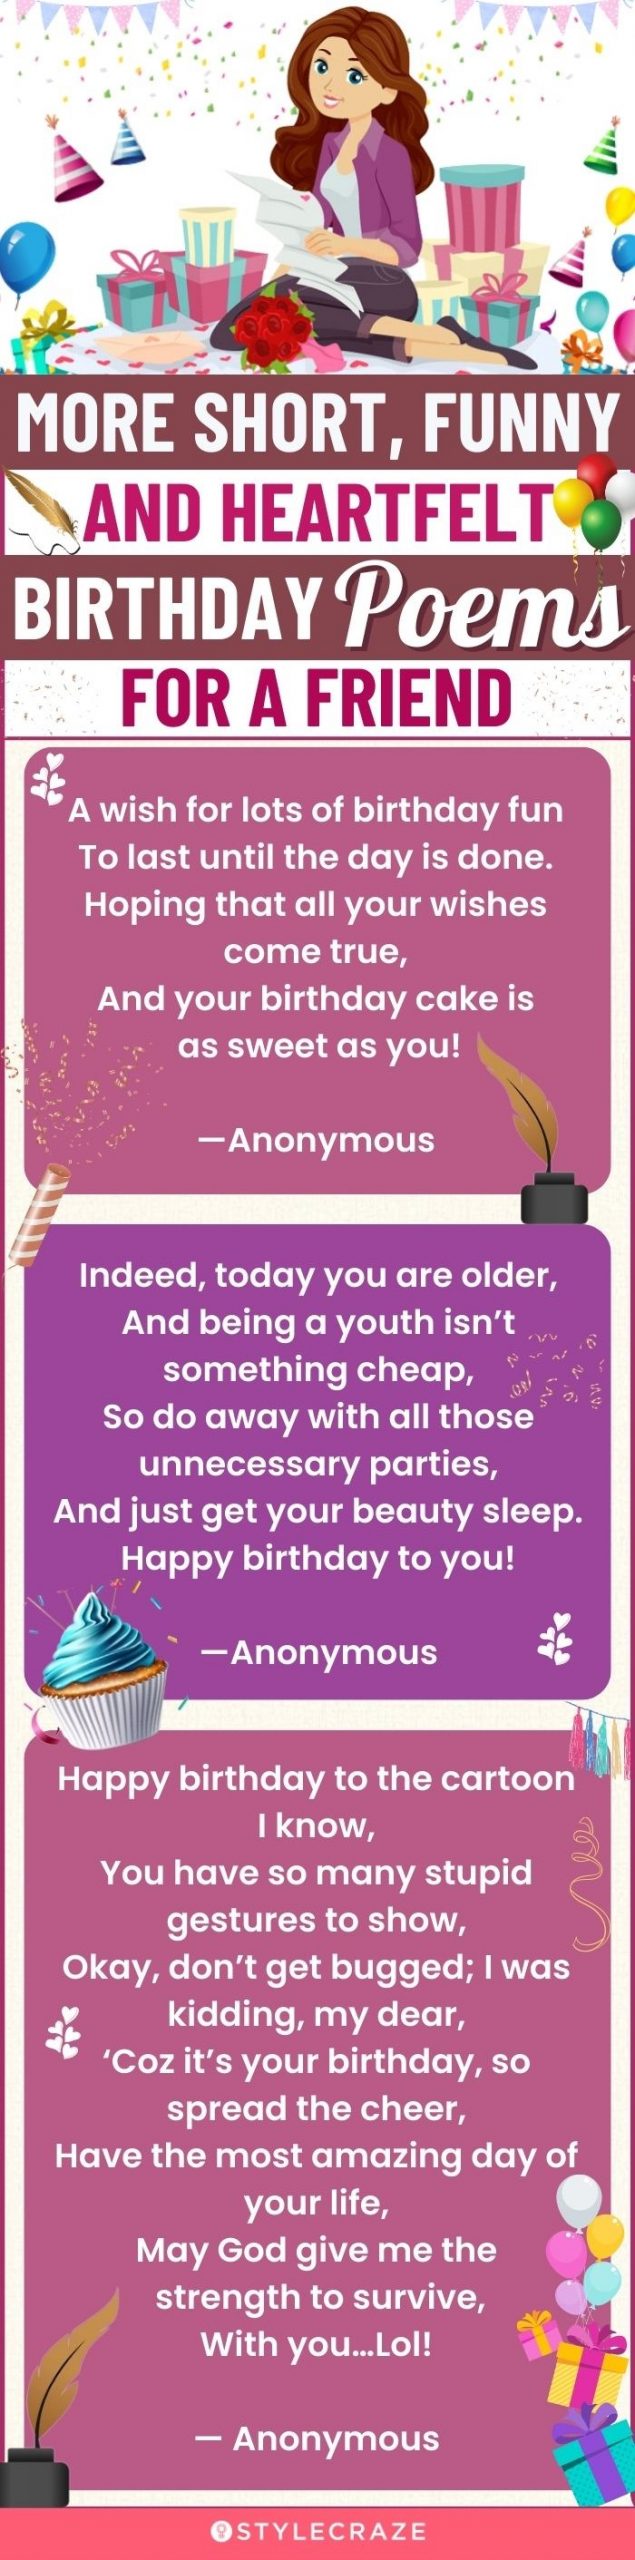 Heart Touching Birthday Poems For Friend